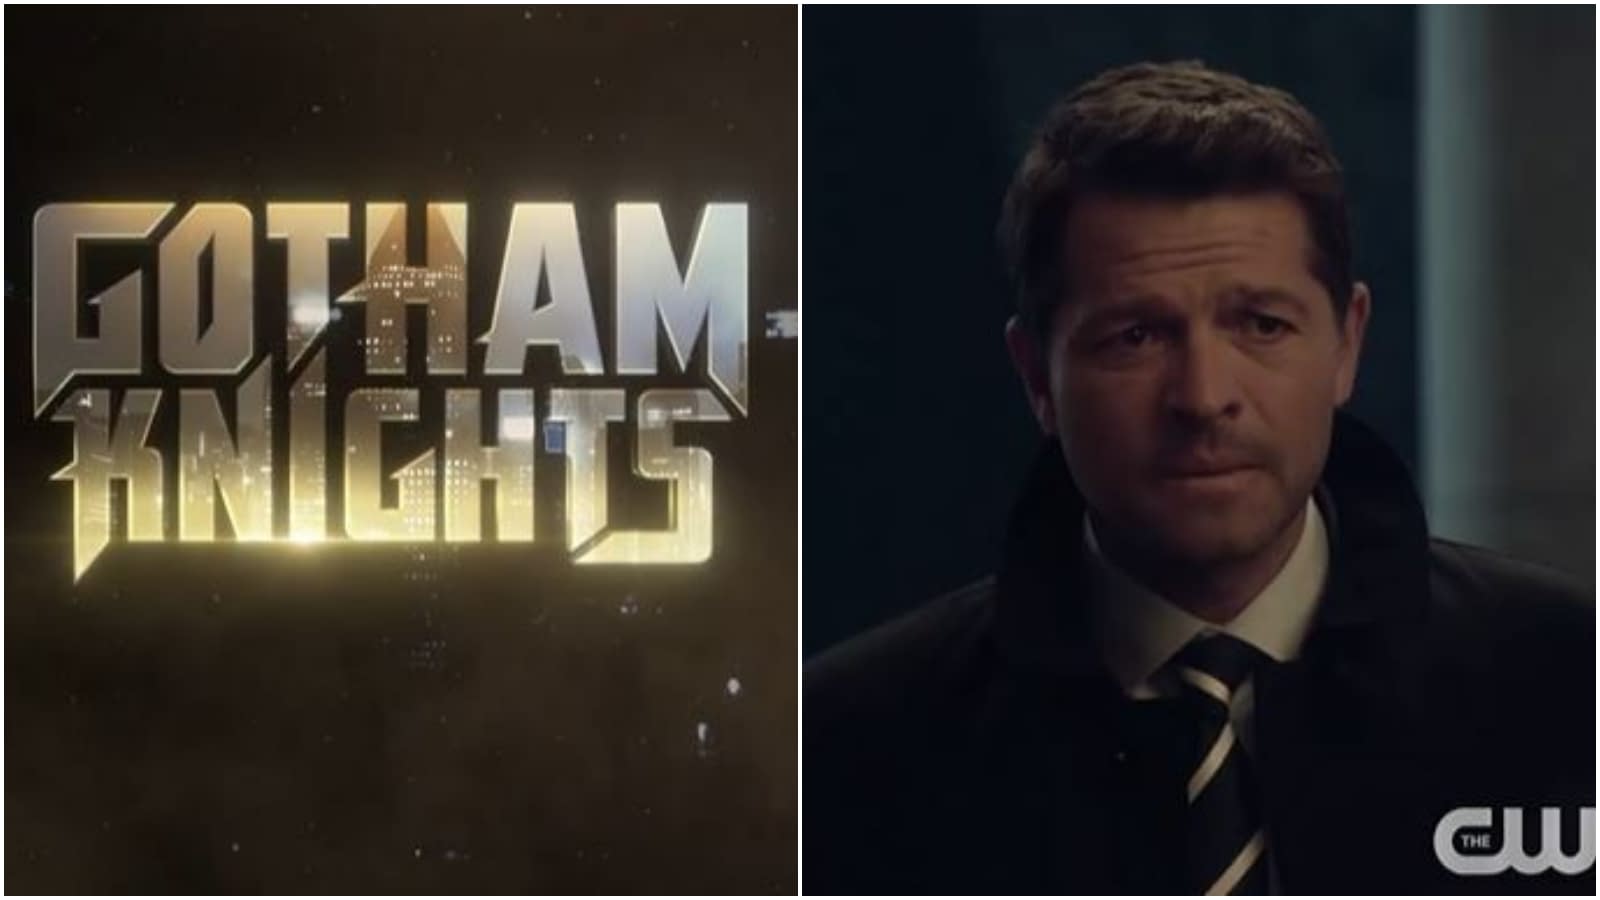 Gotham Knights' TV Series In The Works At The CW - Full Circle Cinema